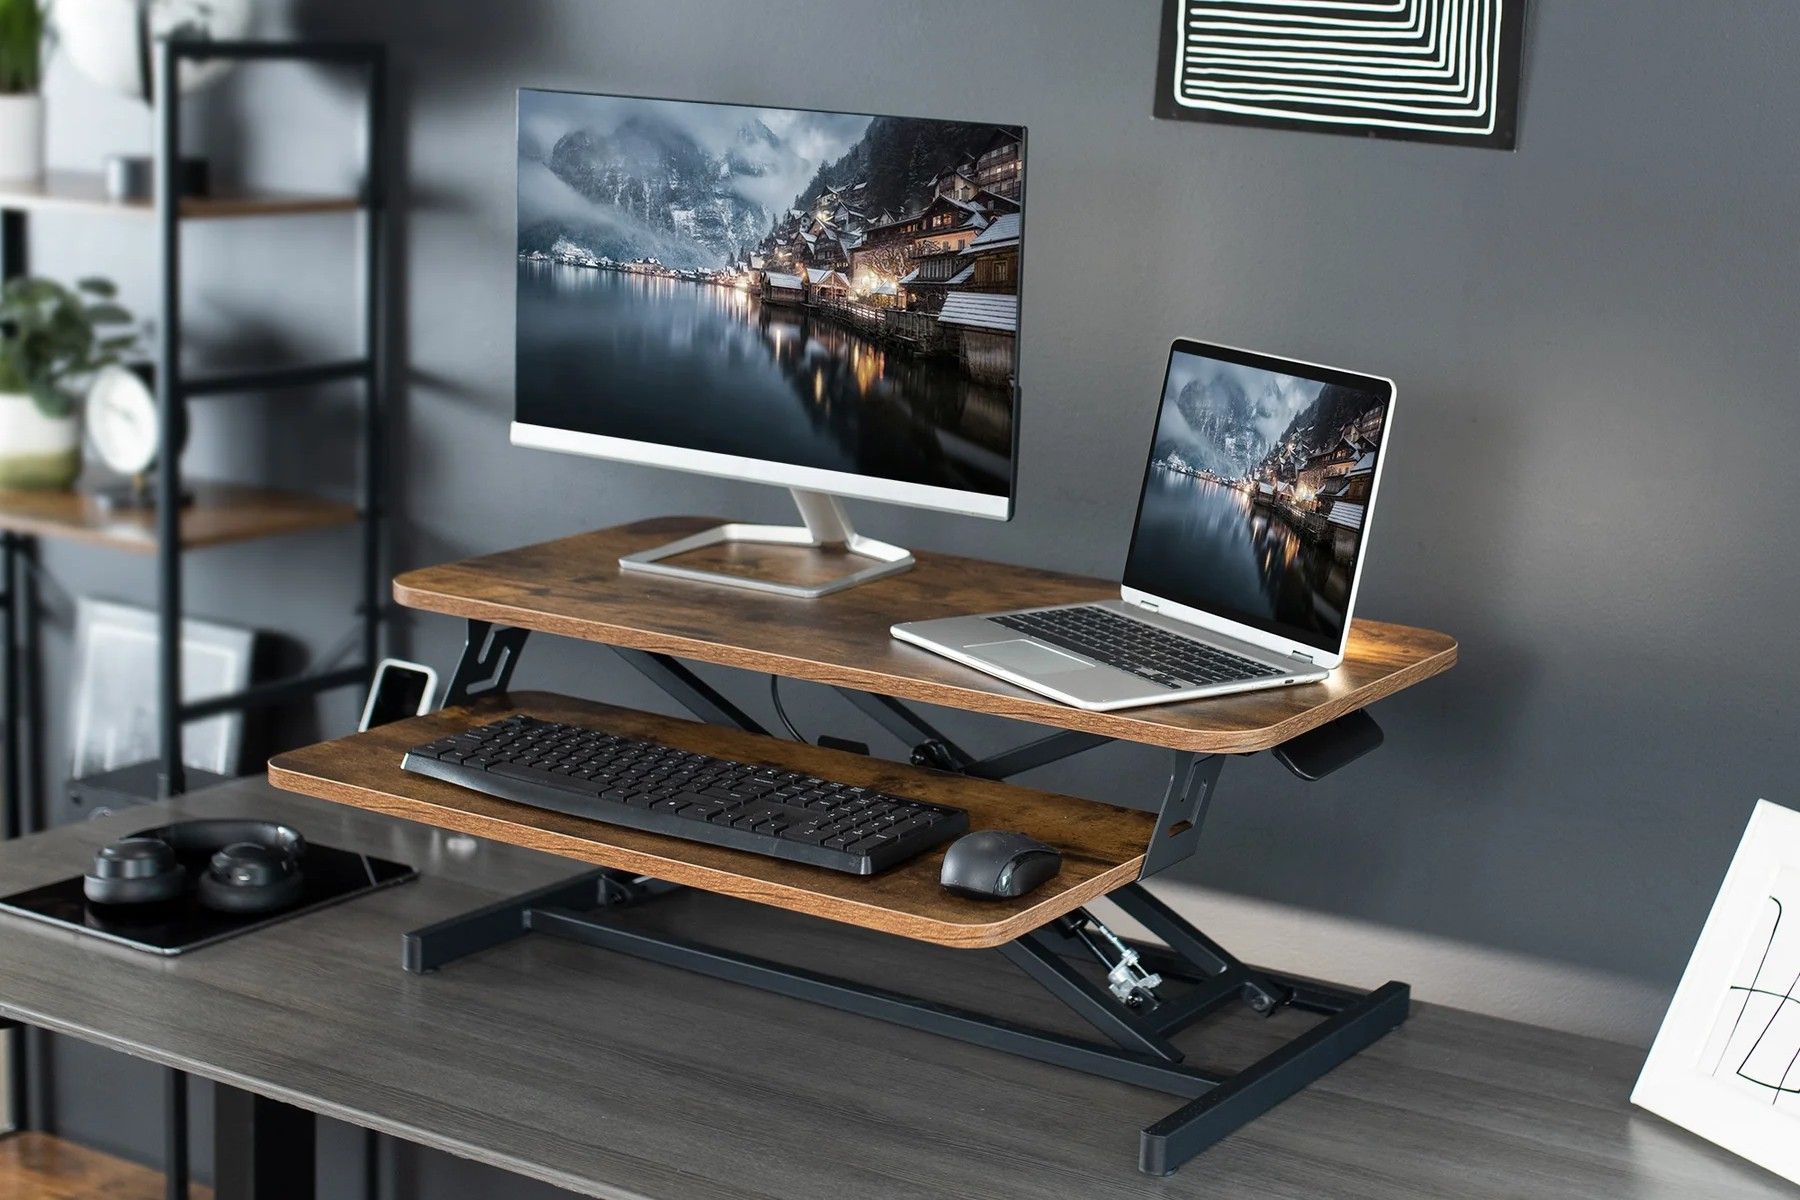 VIVO 32-Inch Standing Desk Converter with a monitor, laptop, and keyboard on the stand